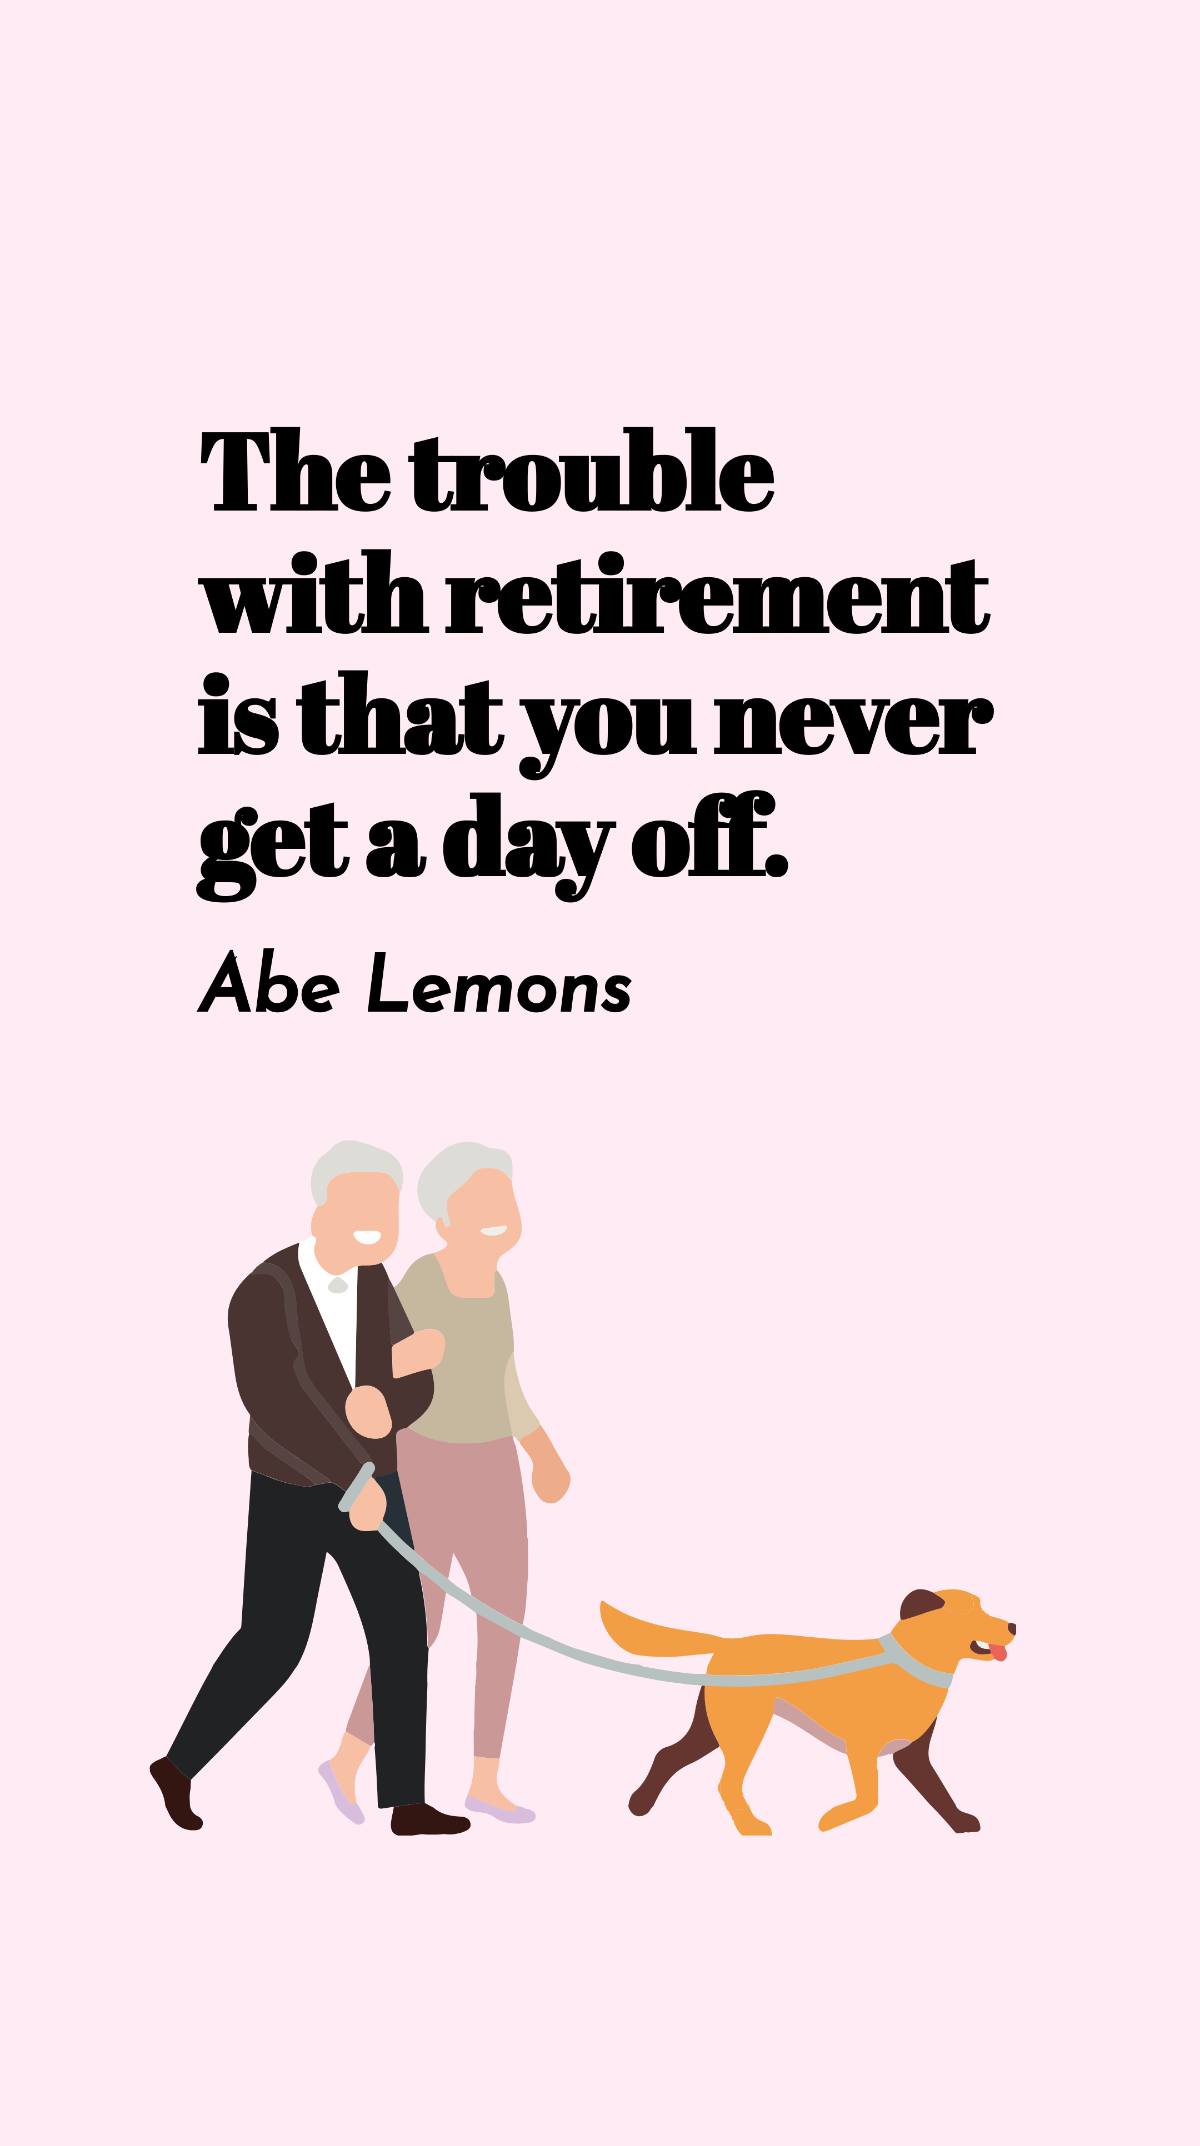 Abe Lemons - The trouble with retirement is that you never get a day off.